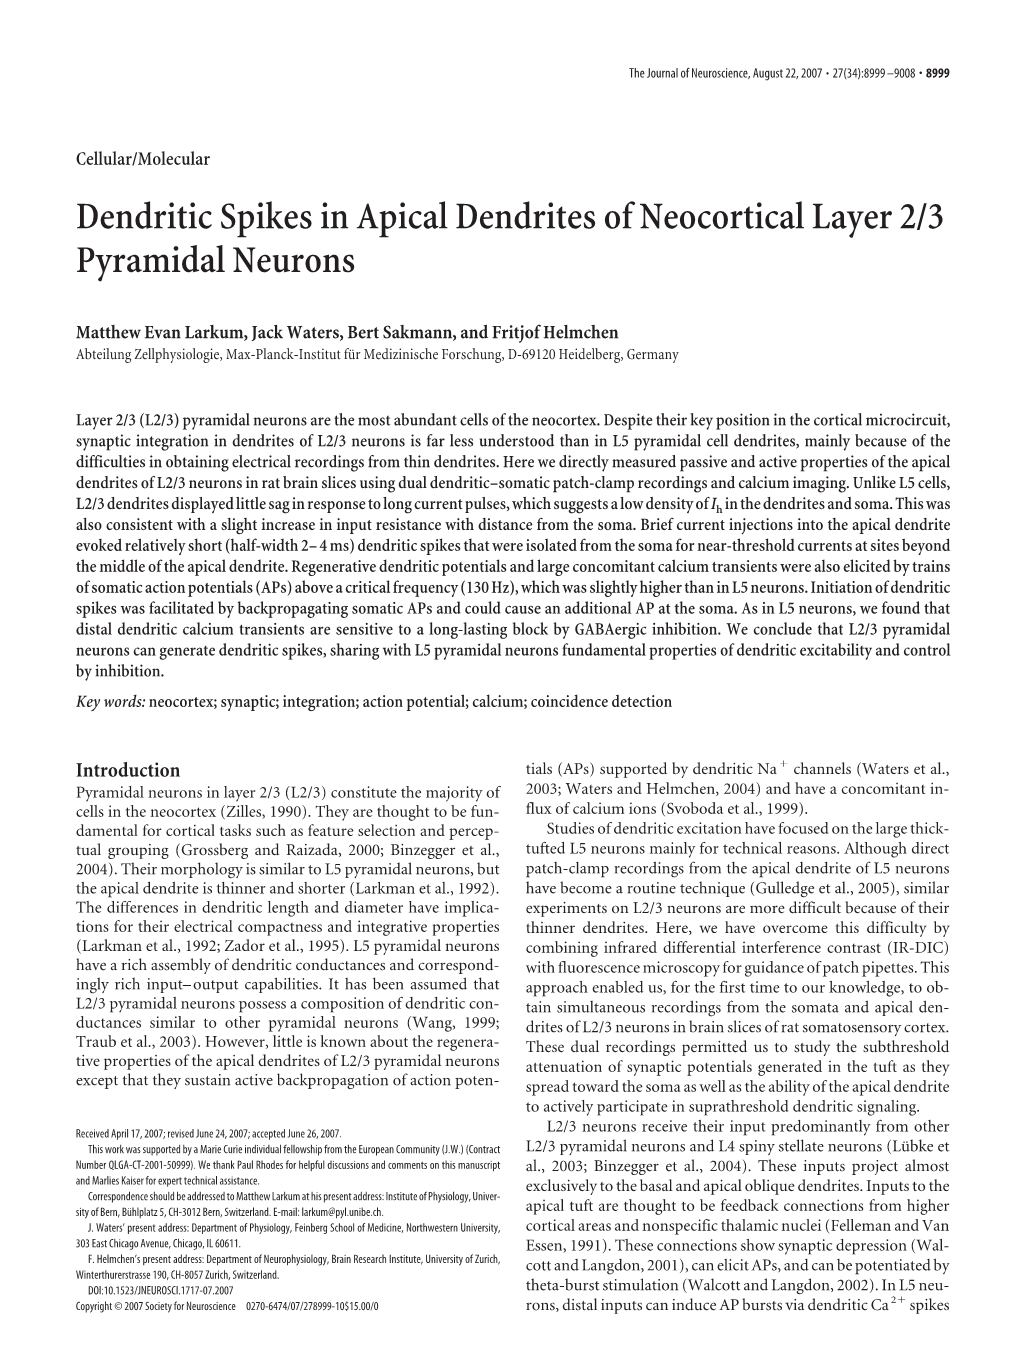 Dendritic Spikes in Apical Dendrites of Neocortical Layer 2/3 Pyramidal Neurons